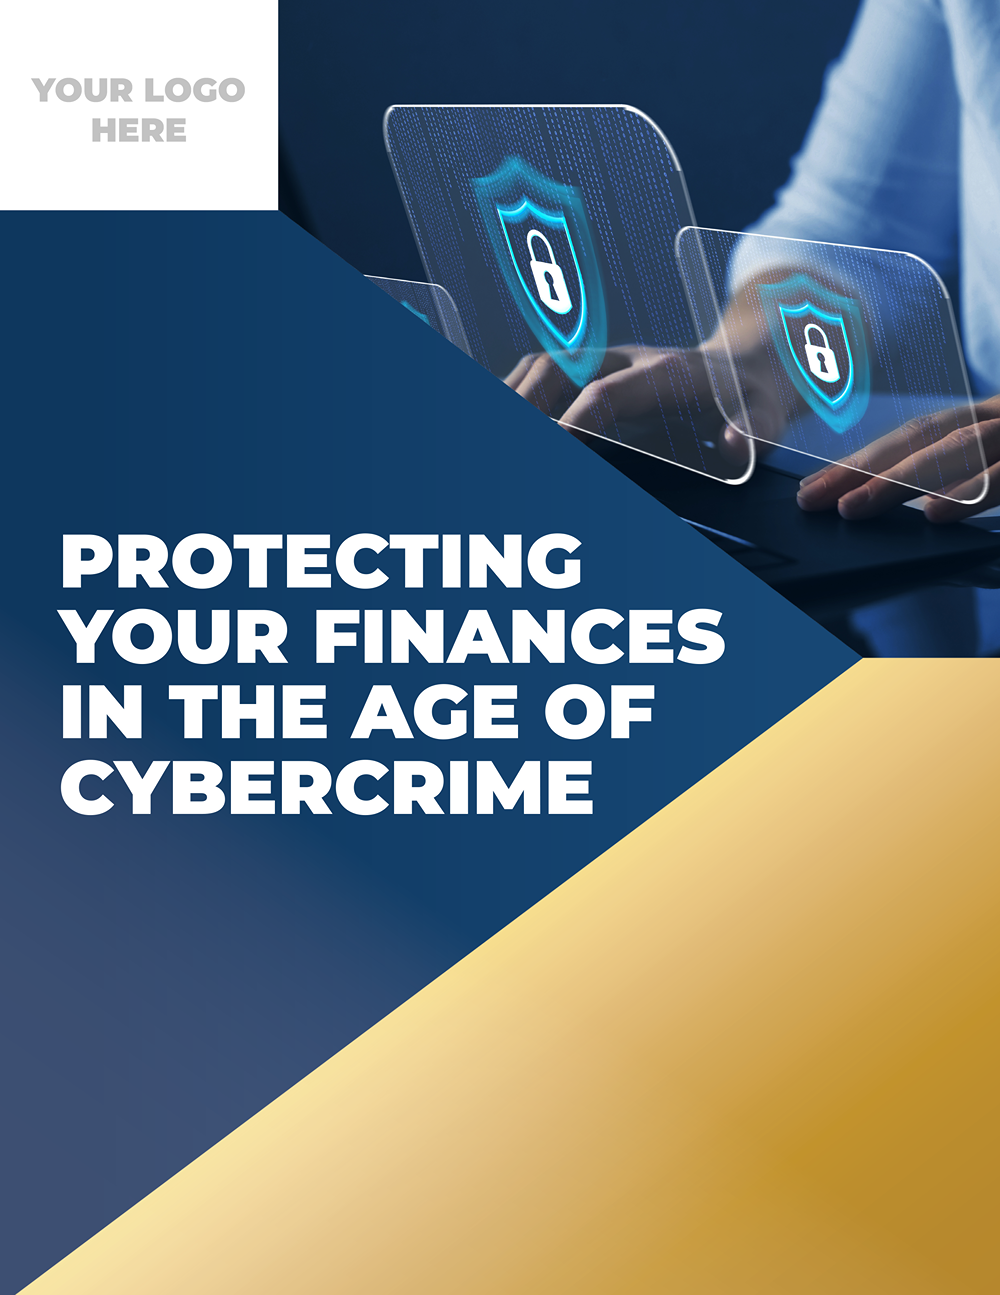 Protecting Your Finances in the Age of Cybercrime